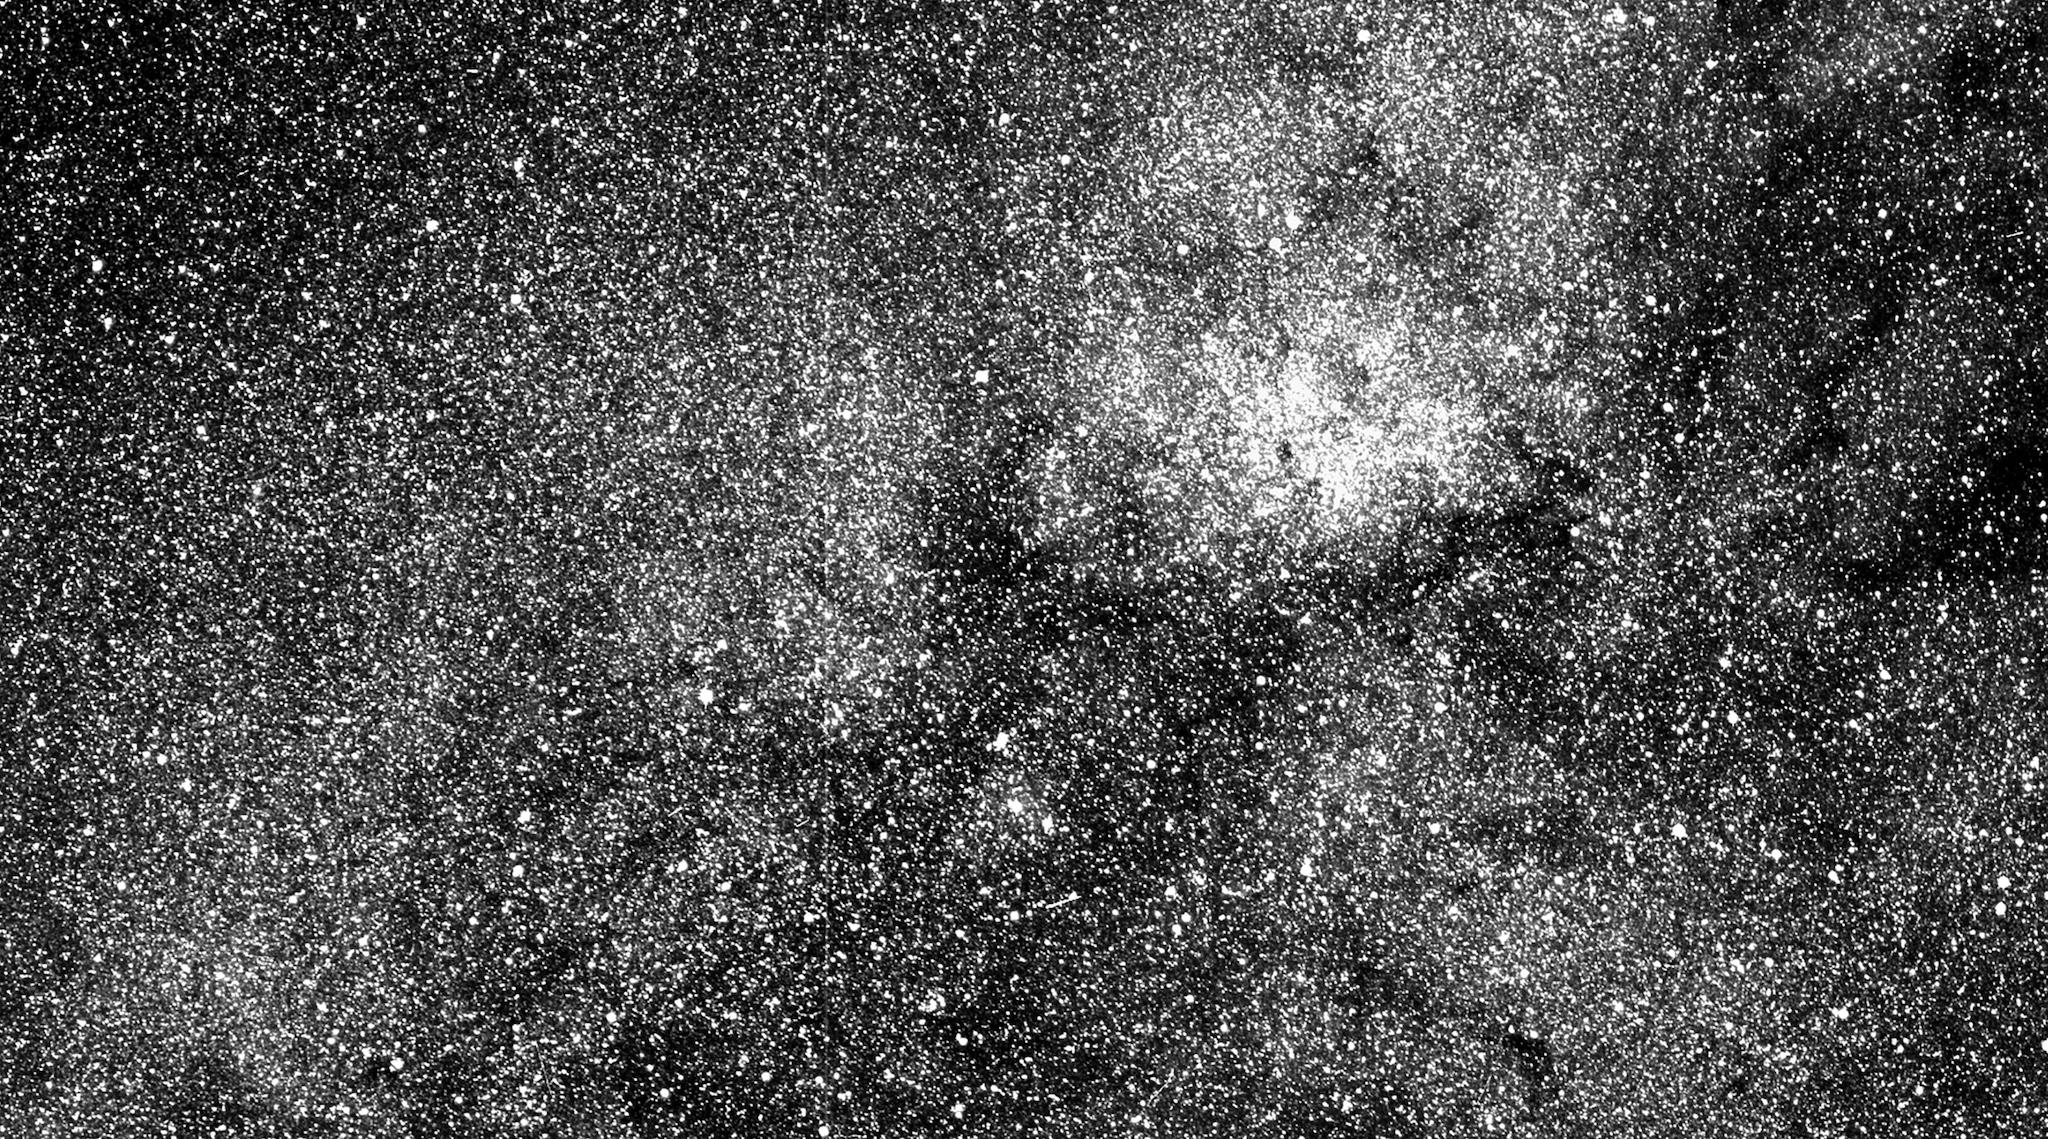 This test image from one of the four cameras aboard the Transiting Exoplanet Survey Satellite (TESS) captures a swath of the southern sky along the plane of our galaxy. TESS is expected to cover more than 400 times the amount of sky shown in this image when using all four of its cameras during science operations